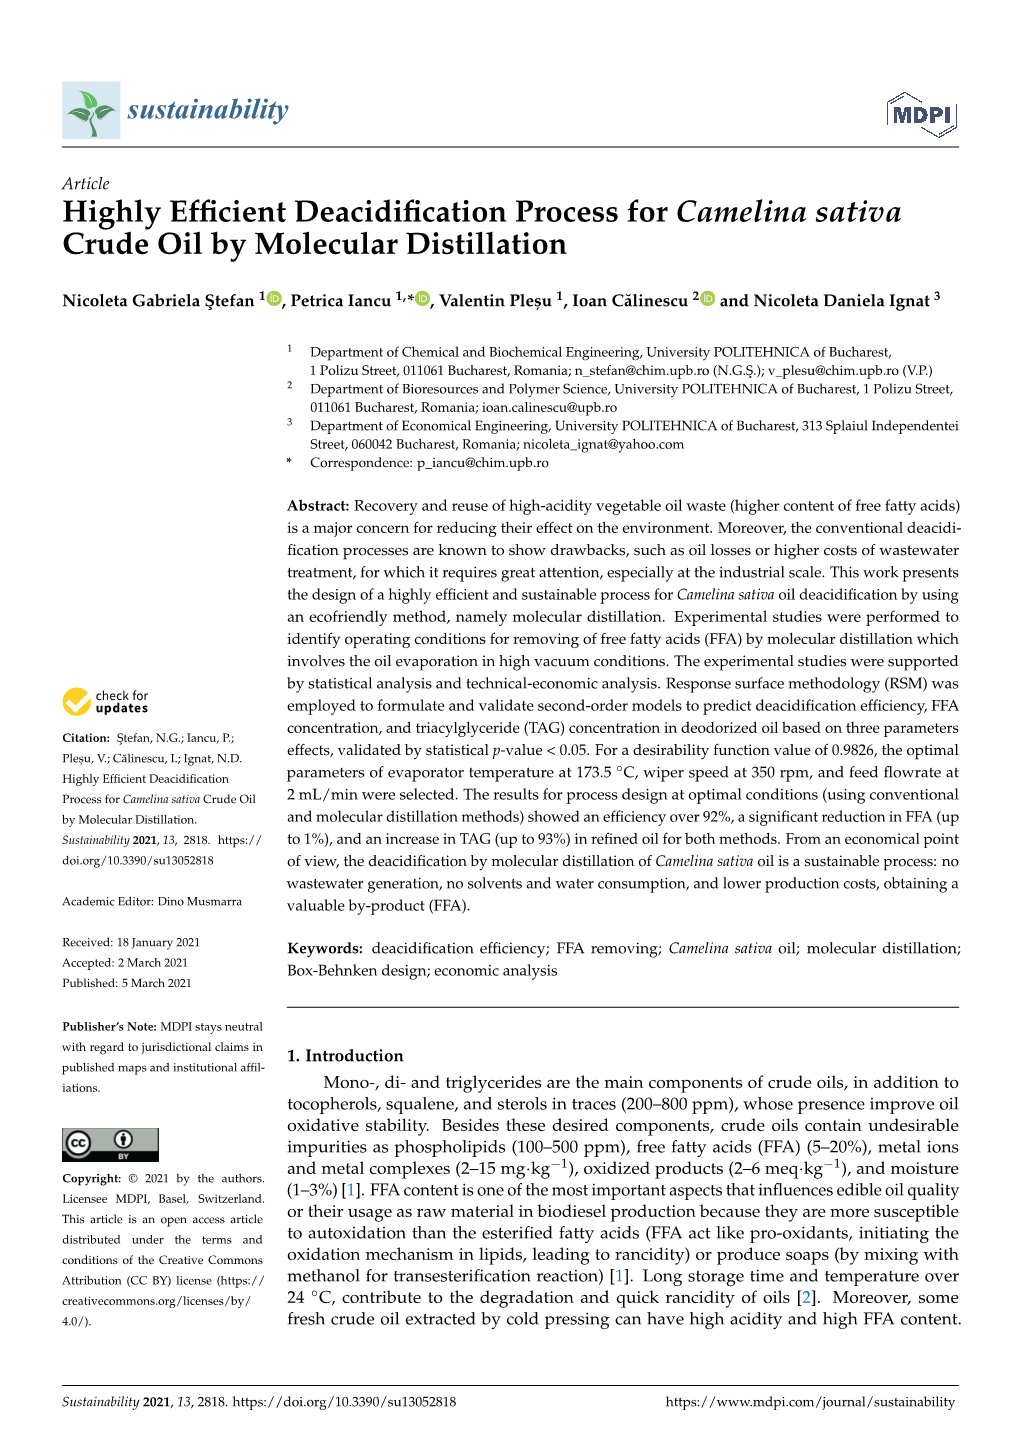 Highly Efficient Deacidification Process for Camelina Sativa Crude